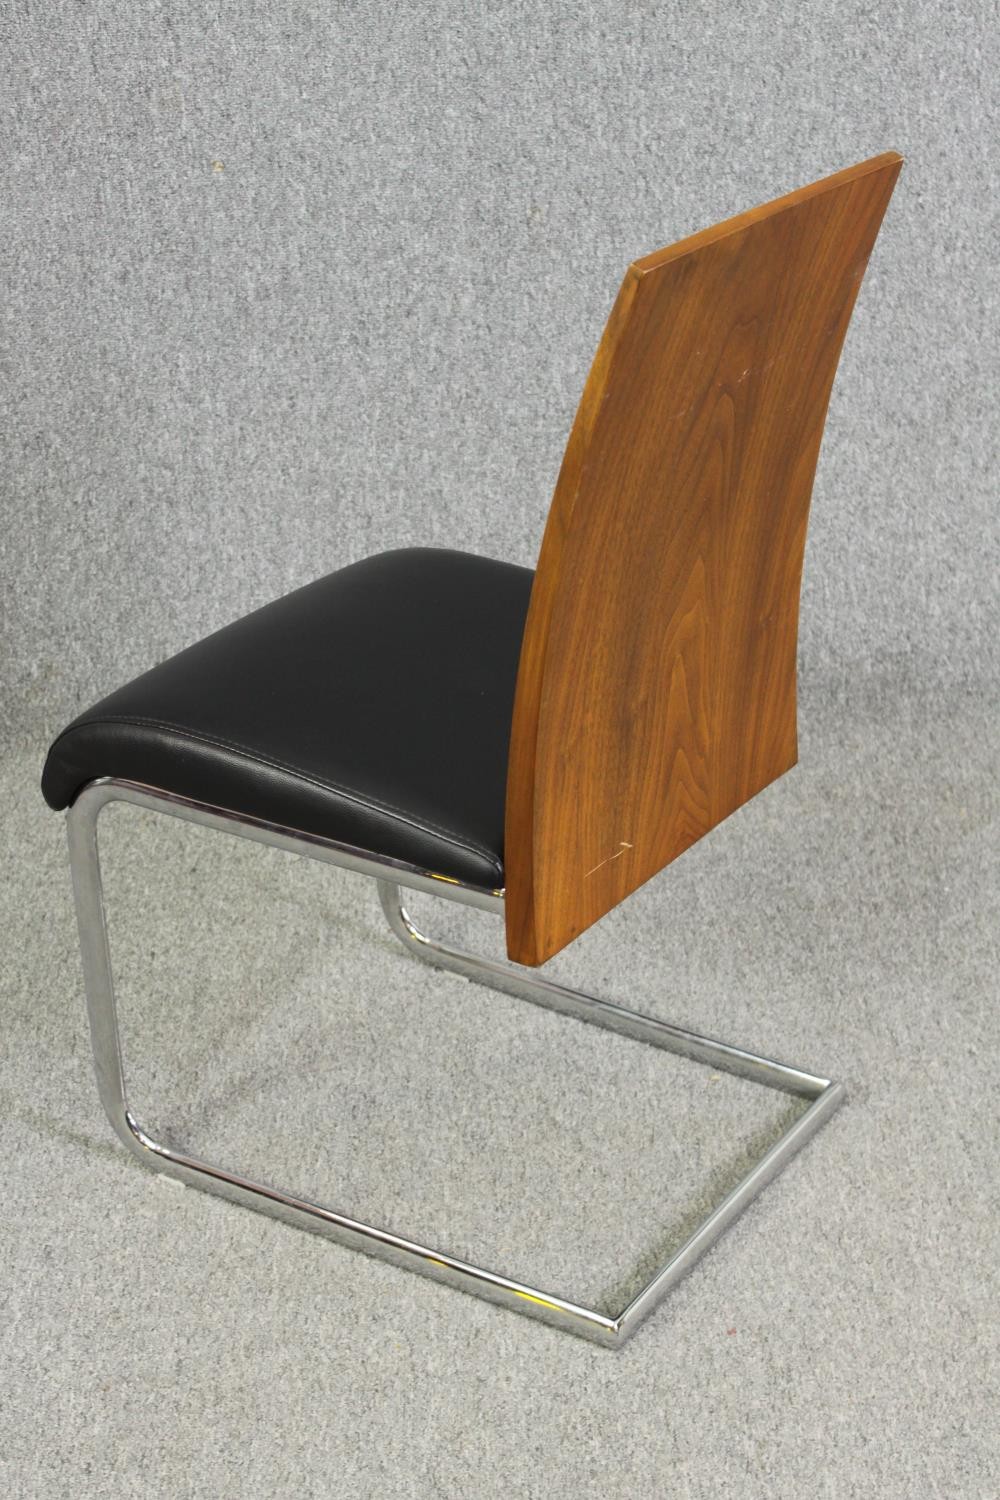 Dining chairs, a set of six, contemporary, chrome and leather upholstered. - Image 6 of 7